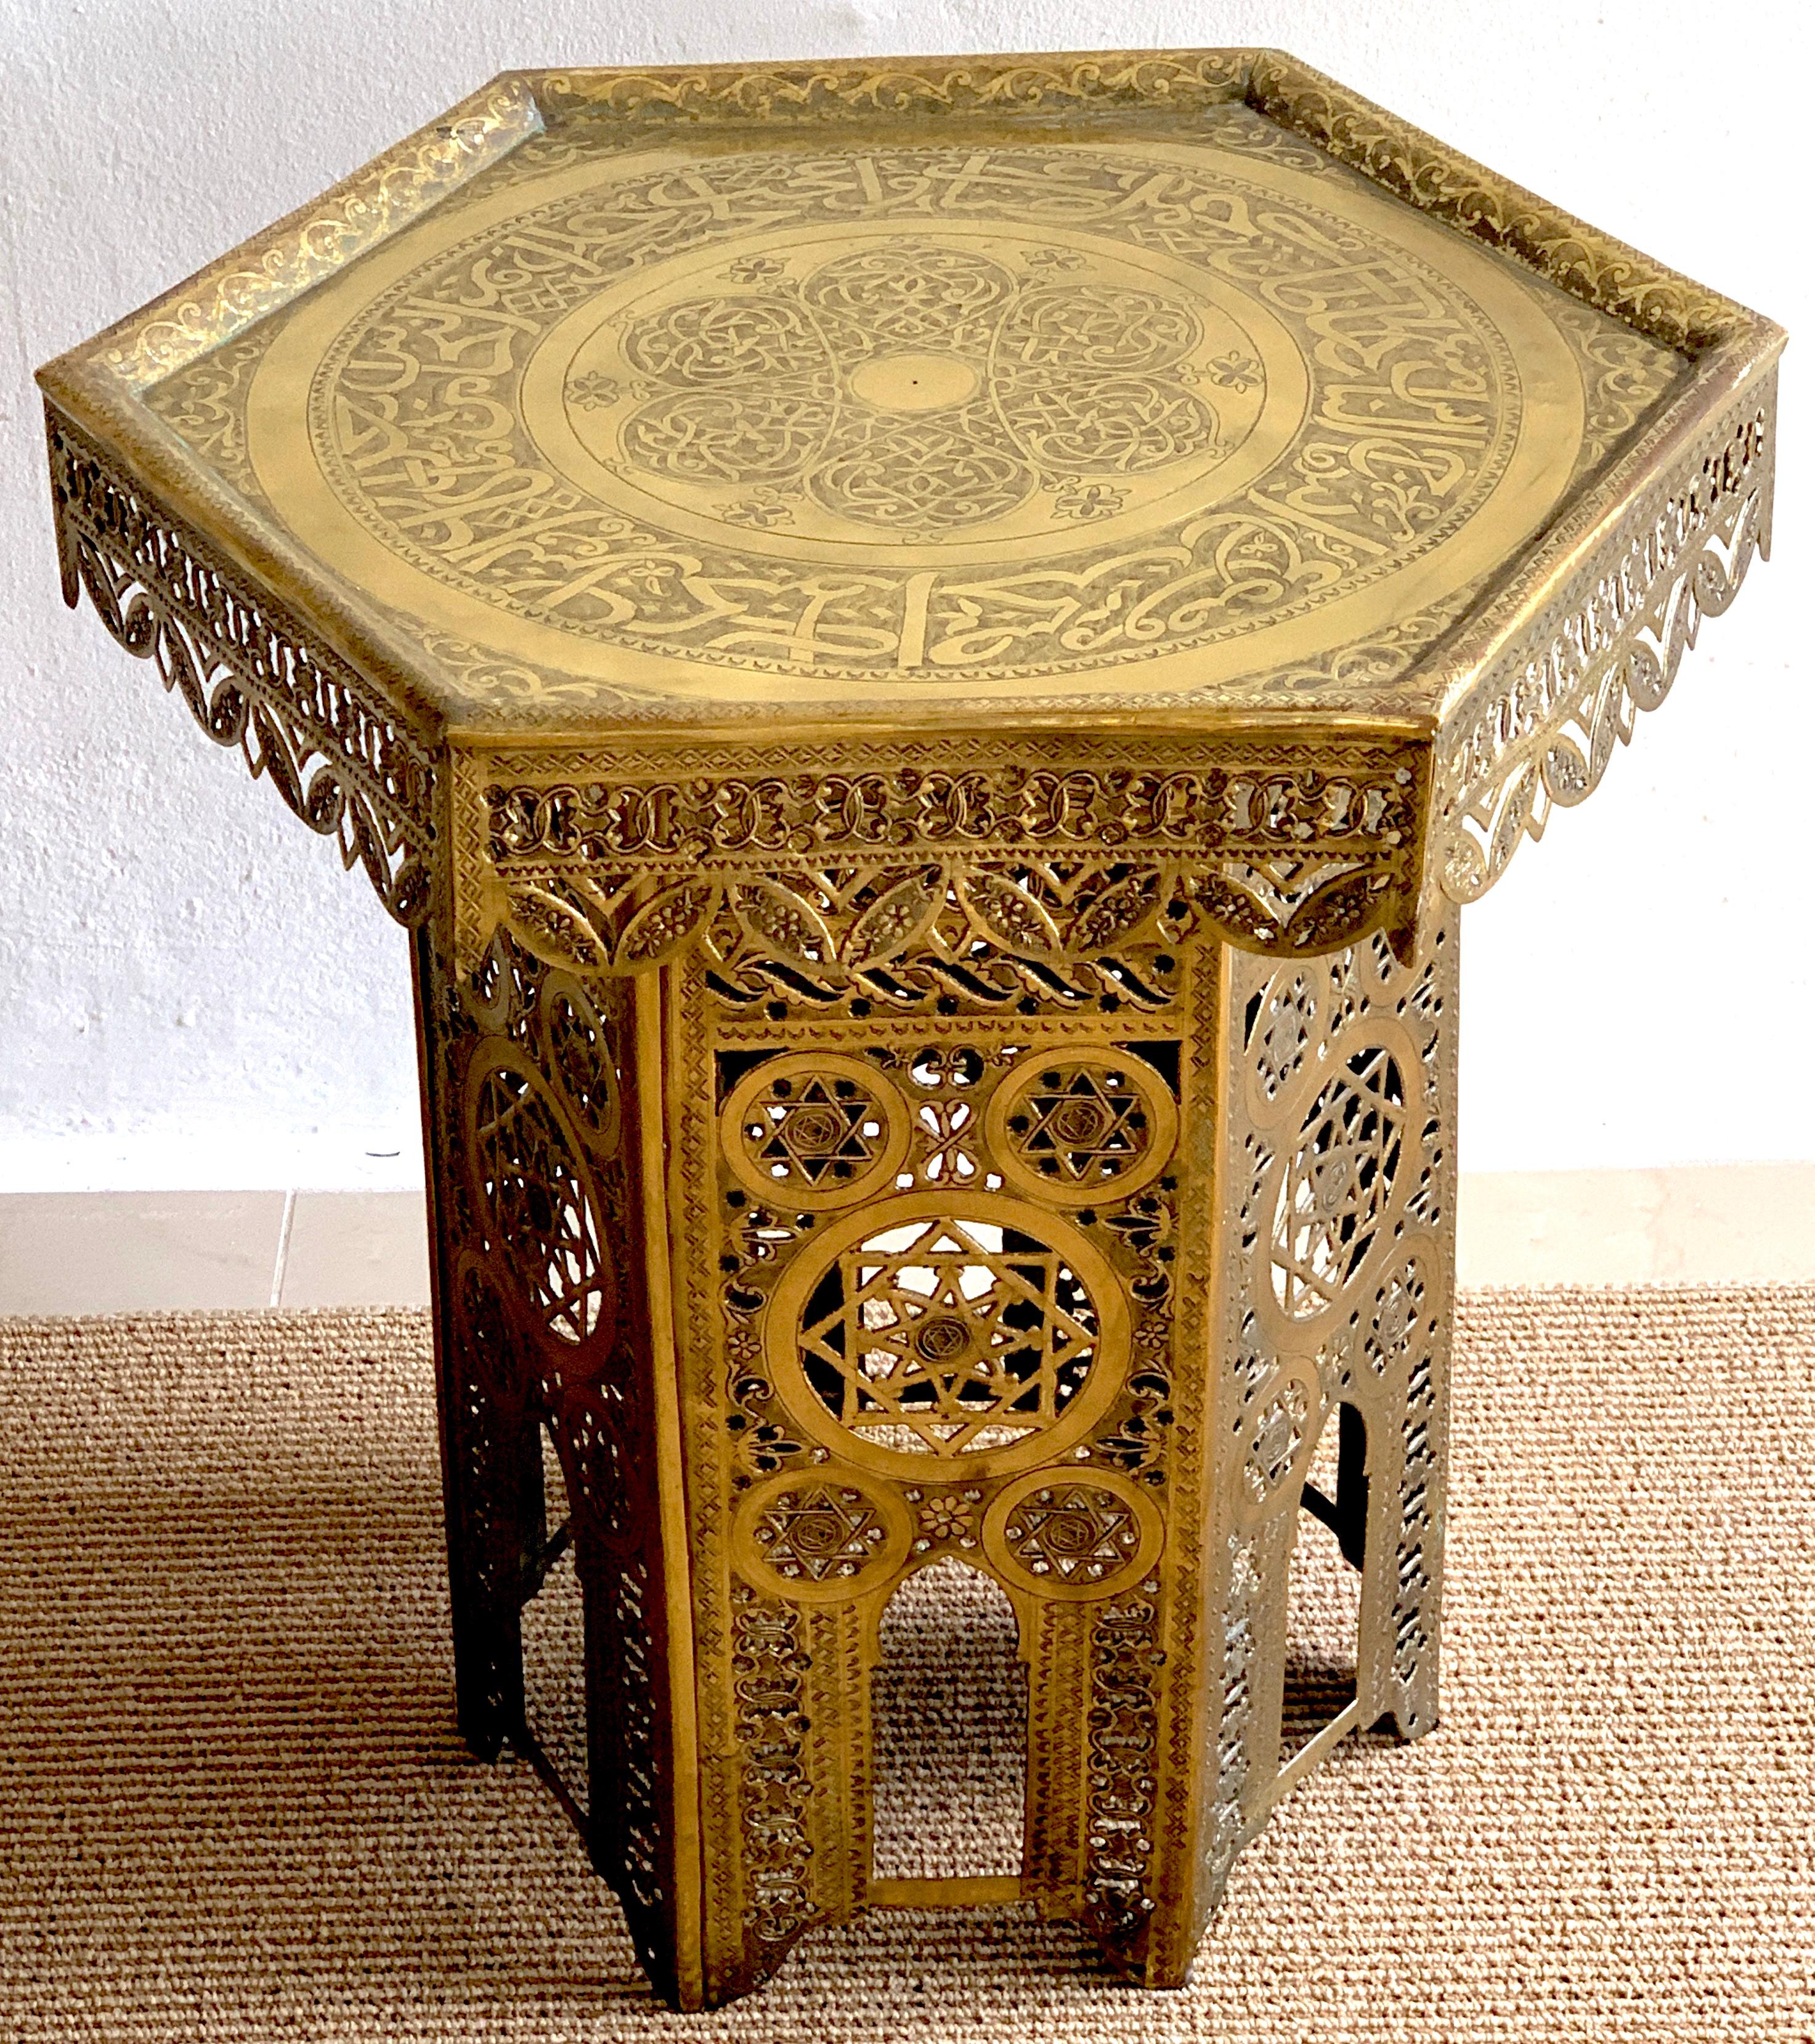 Antique brass Moorish side table, of hexagonal shape with all-over chased decoration, the inset 18.5-Inch. diameter top with custom glass top (not shown, but is included) raised on a pierced conforming pedestal base
The outside tabletop diameter is